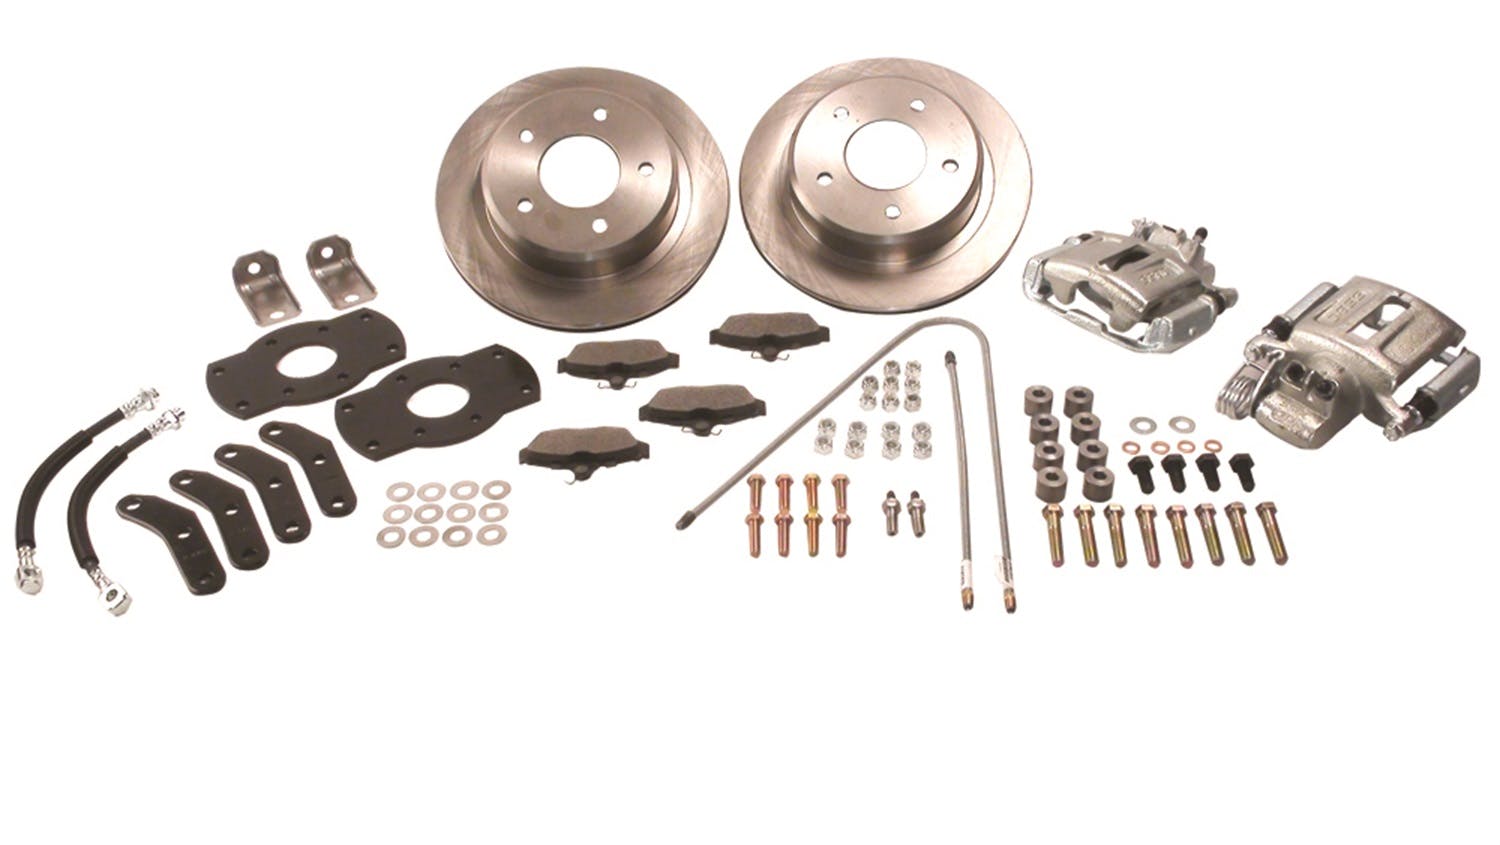 Stainless Steel Brakes A130-2BK Kit A130-2 w/black calipers